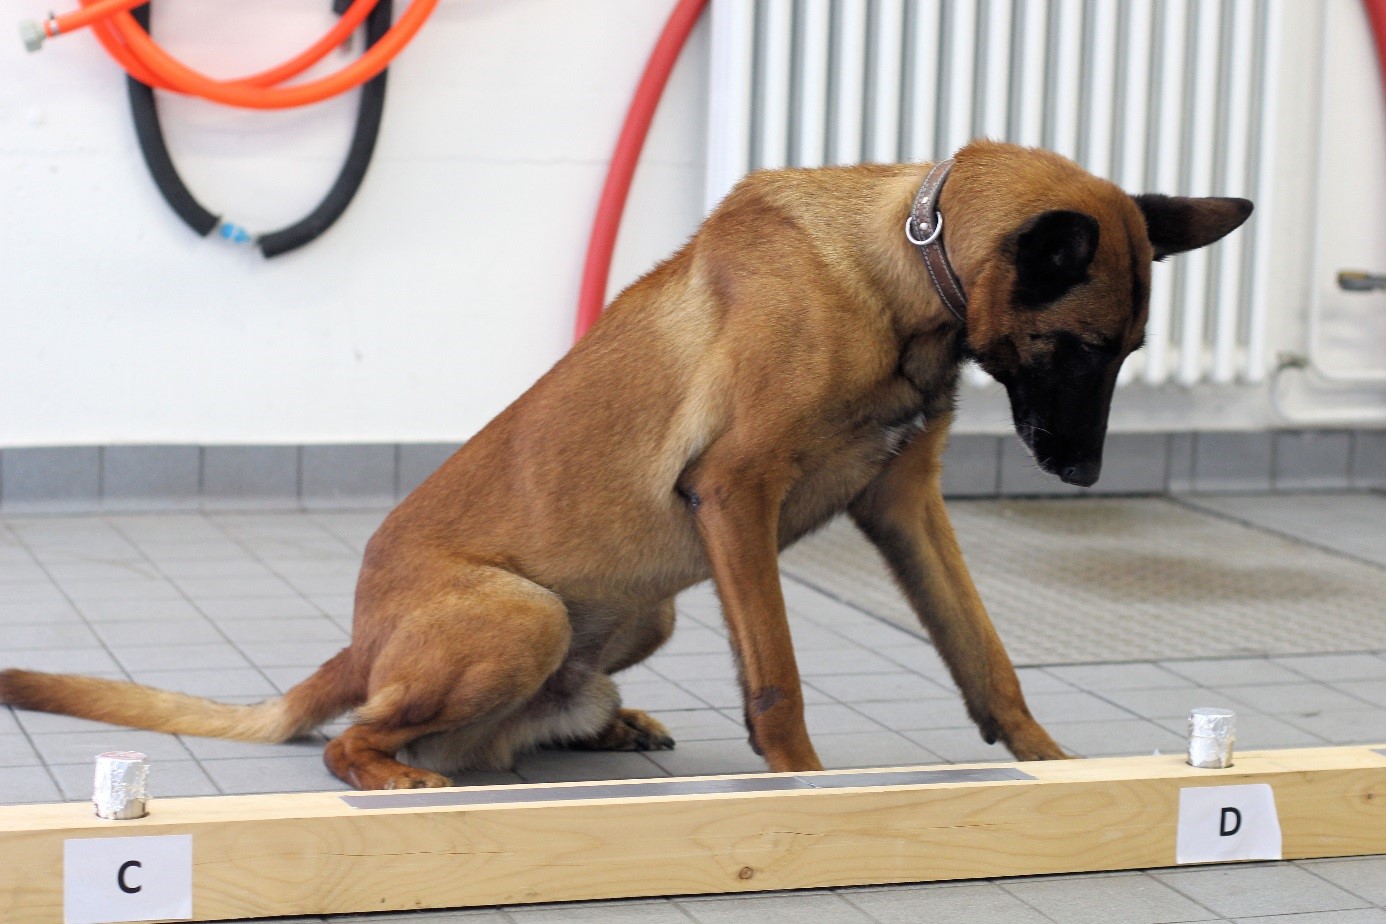 Explosives detection dog training on the differentiation track